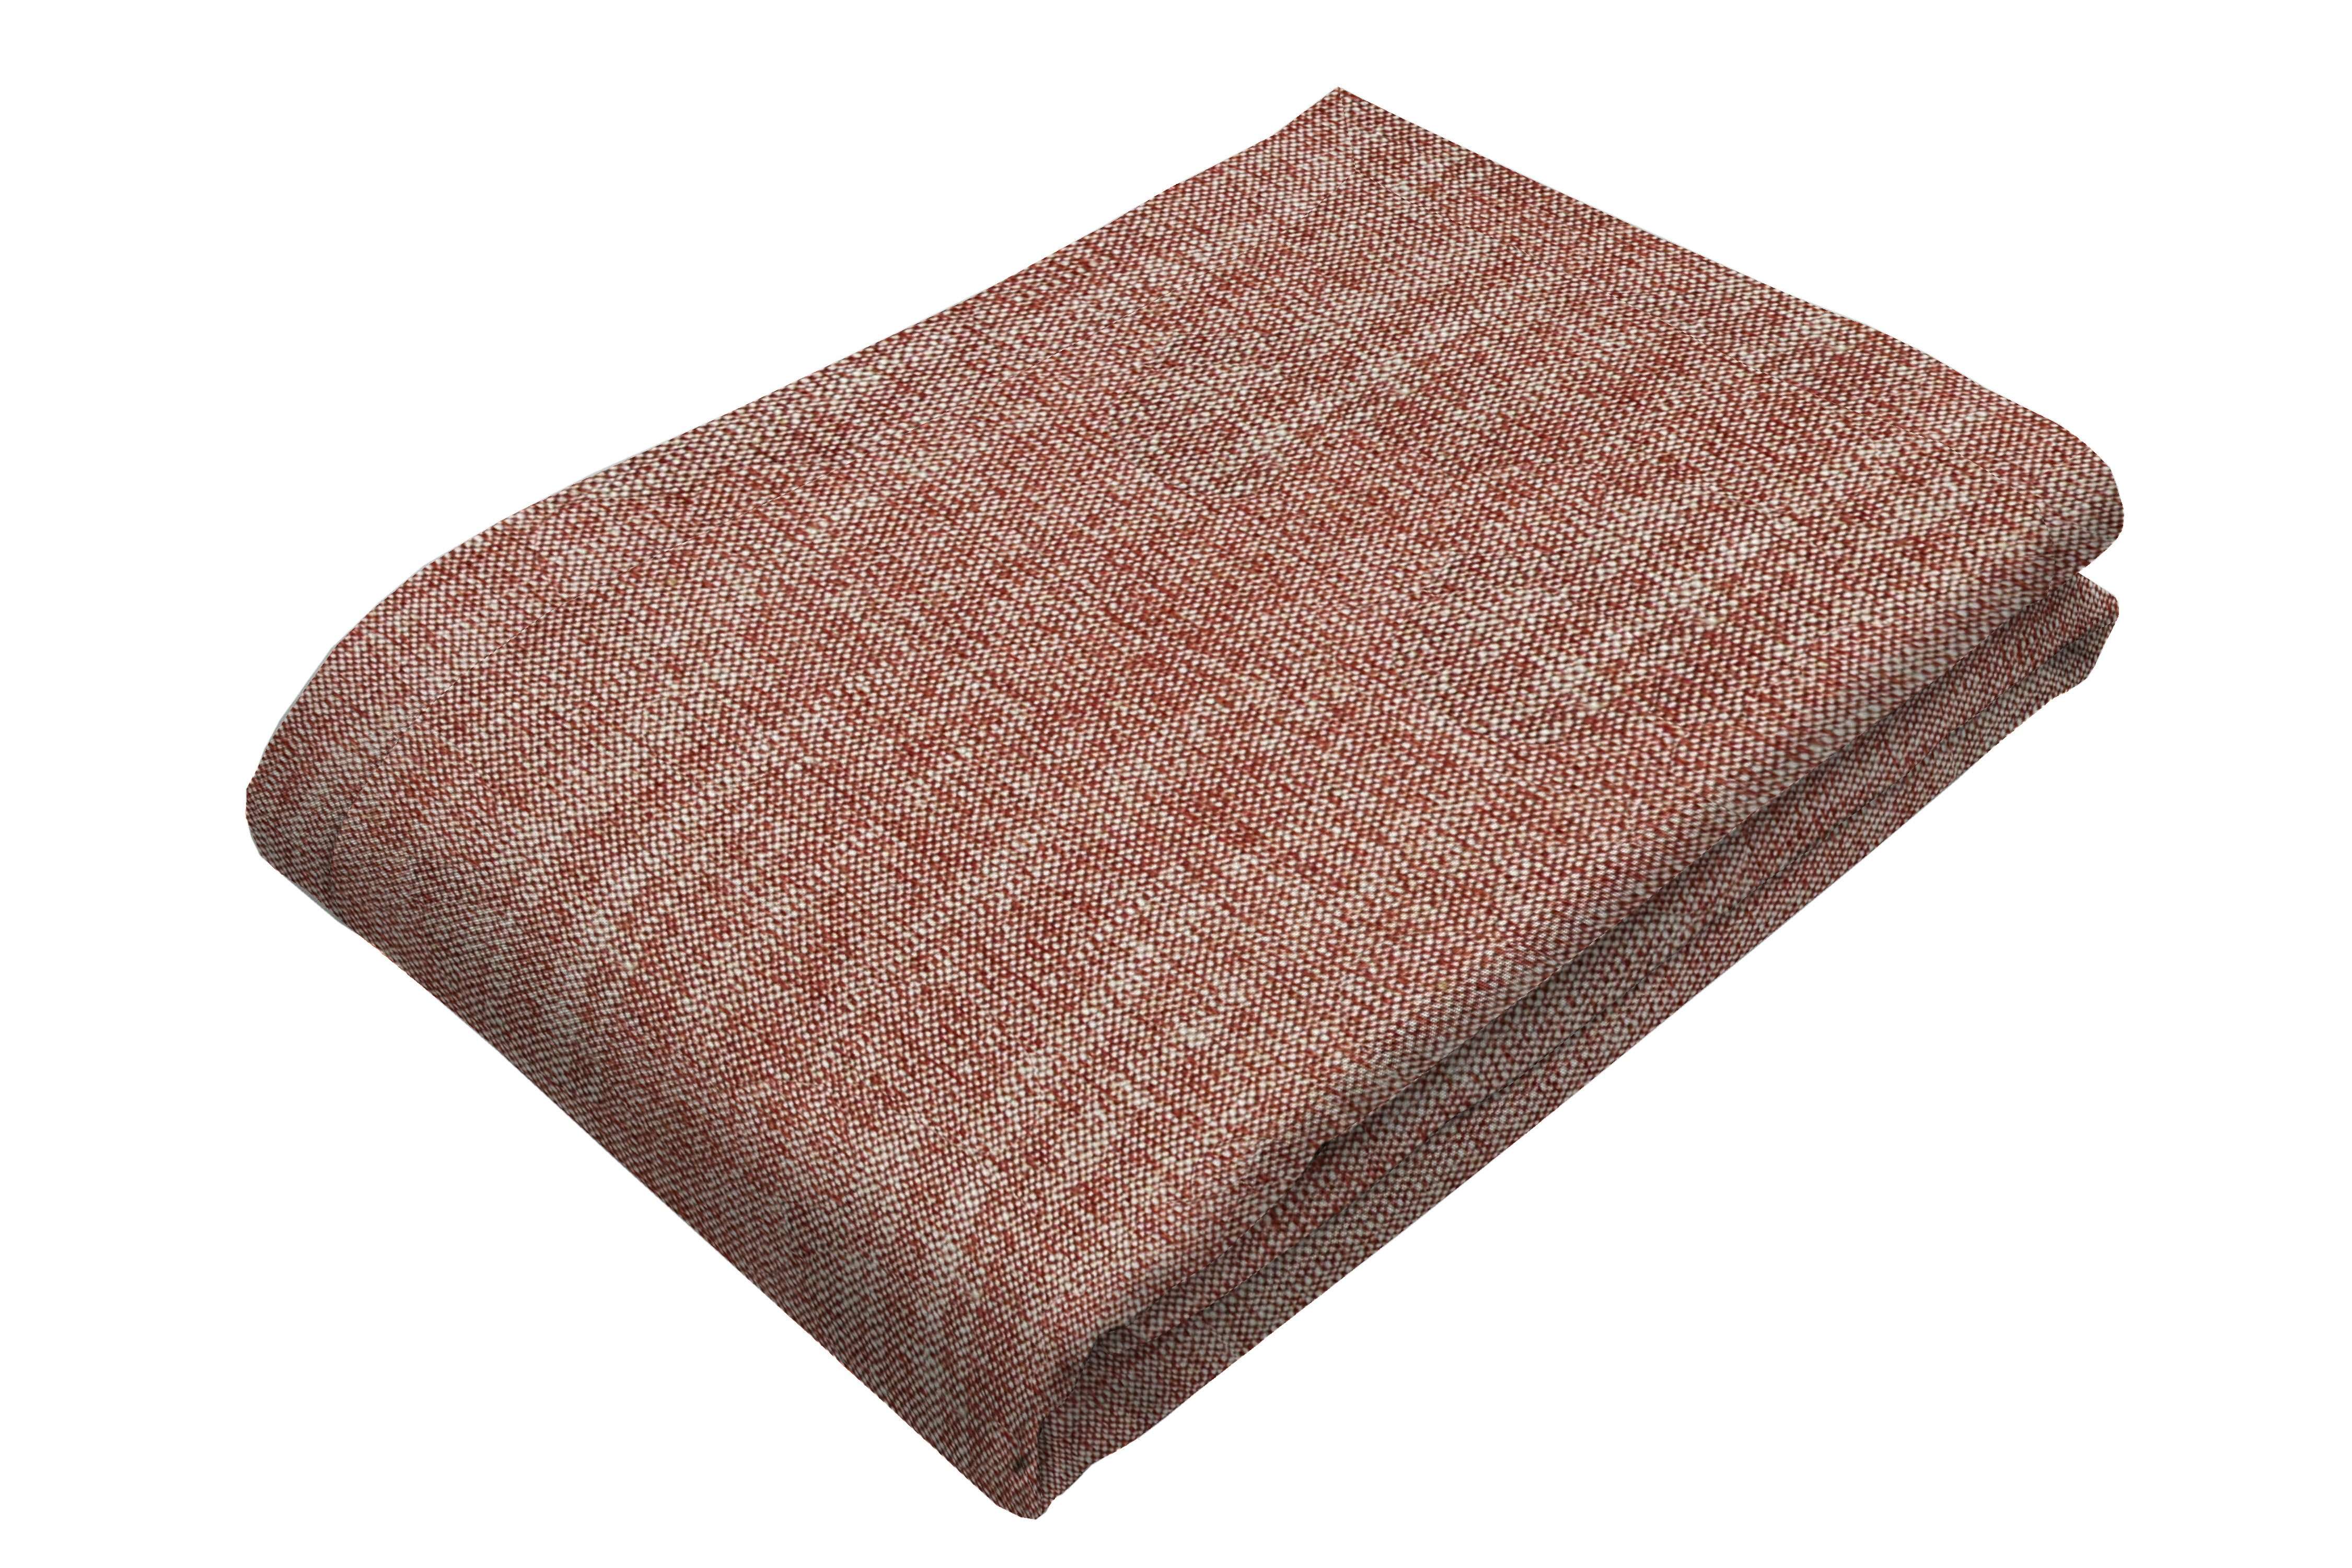 McAlister Textiles Rhumba Burnt Orange Textured Throws & Runners Throws and Runners Regular (130cm x 200cm) 